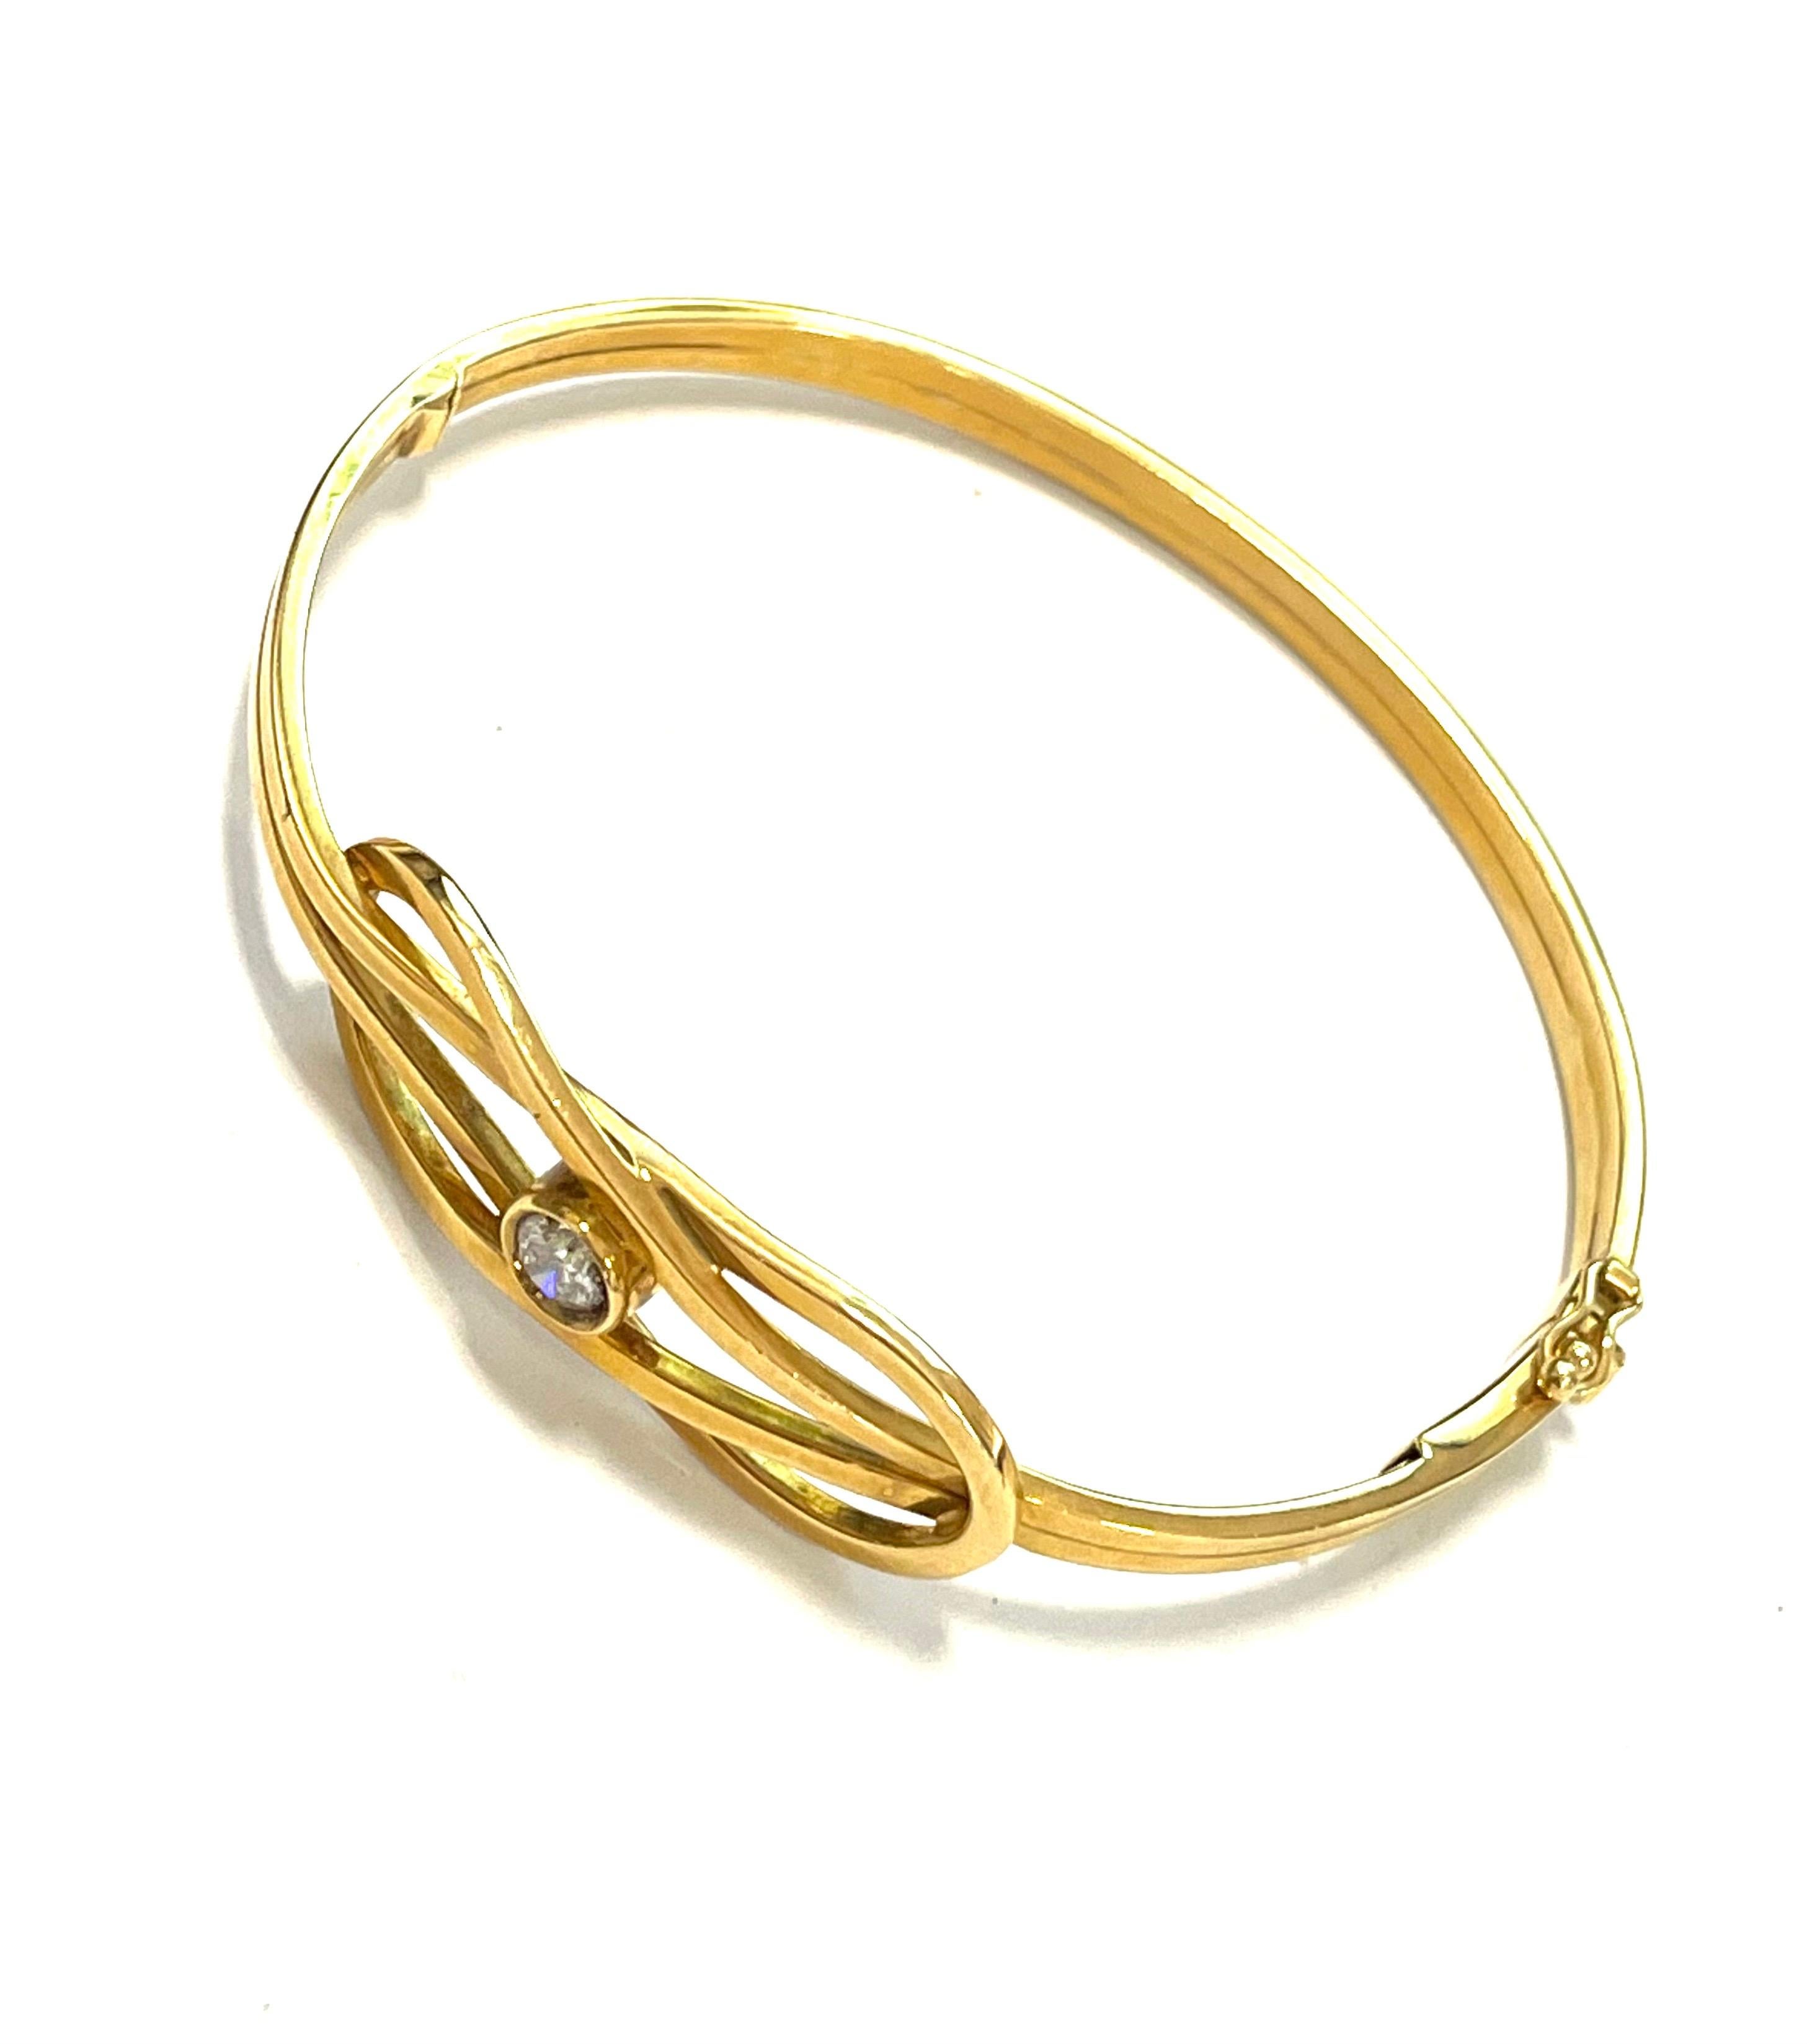 Bangle in 18 kt yellow gold and white diamonds
The total weight of the gold is GR 13.90
The weight of diamonds is ct 0.34

Stamp 10 MI 750
Earrings and chocker available to complete the set

